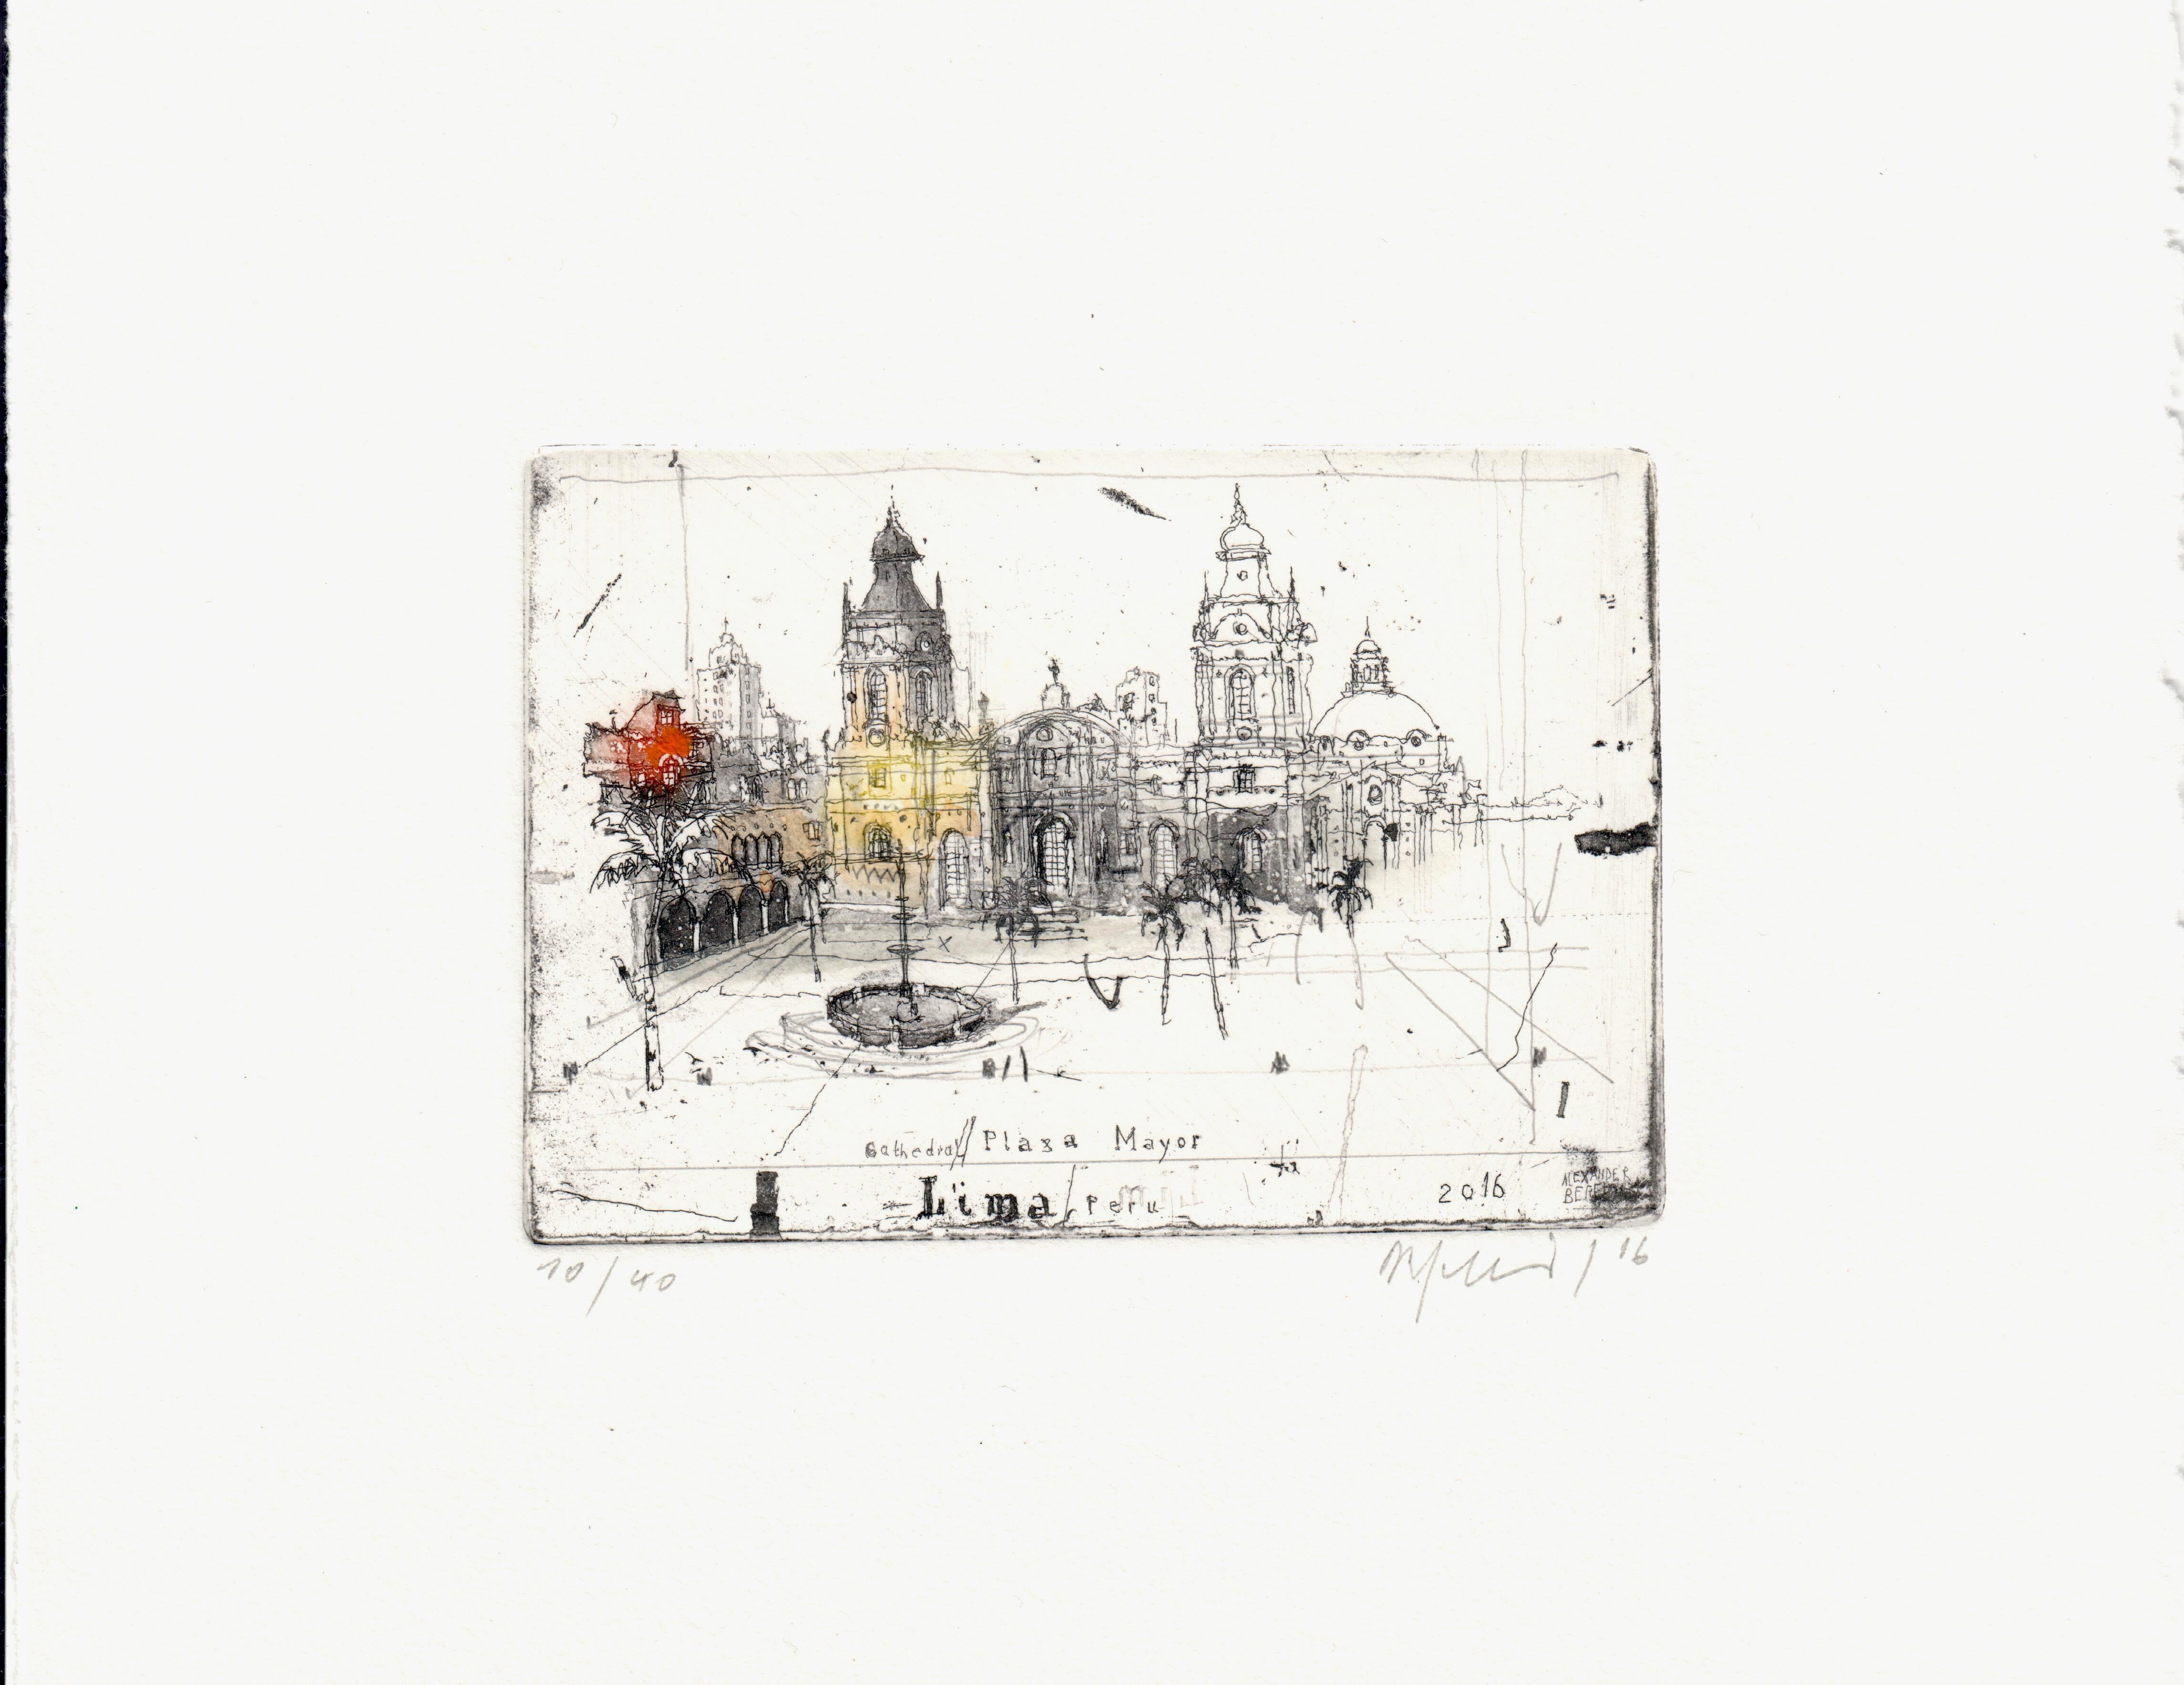 'Peru, Lima I' by Alexander Befelein- beautiful contemporary limited edition print of the city architecture in Lima, Peru. A graphic miniature etching has many layers of details - it's the best choice for small interiors. The print looks like a